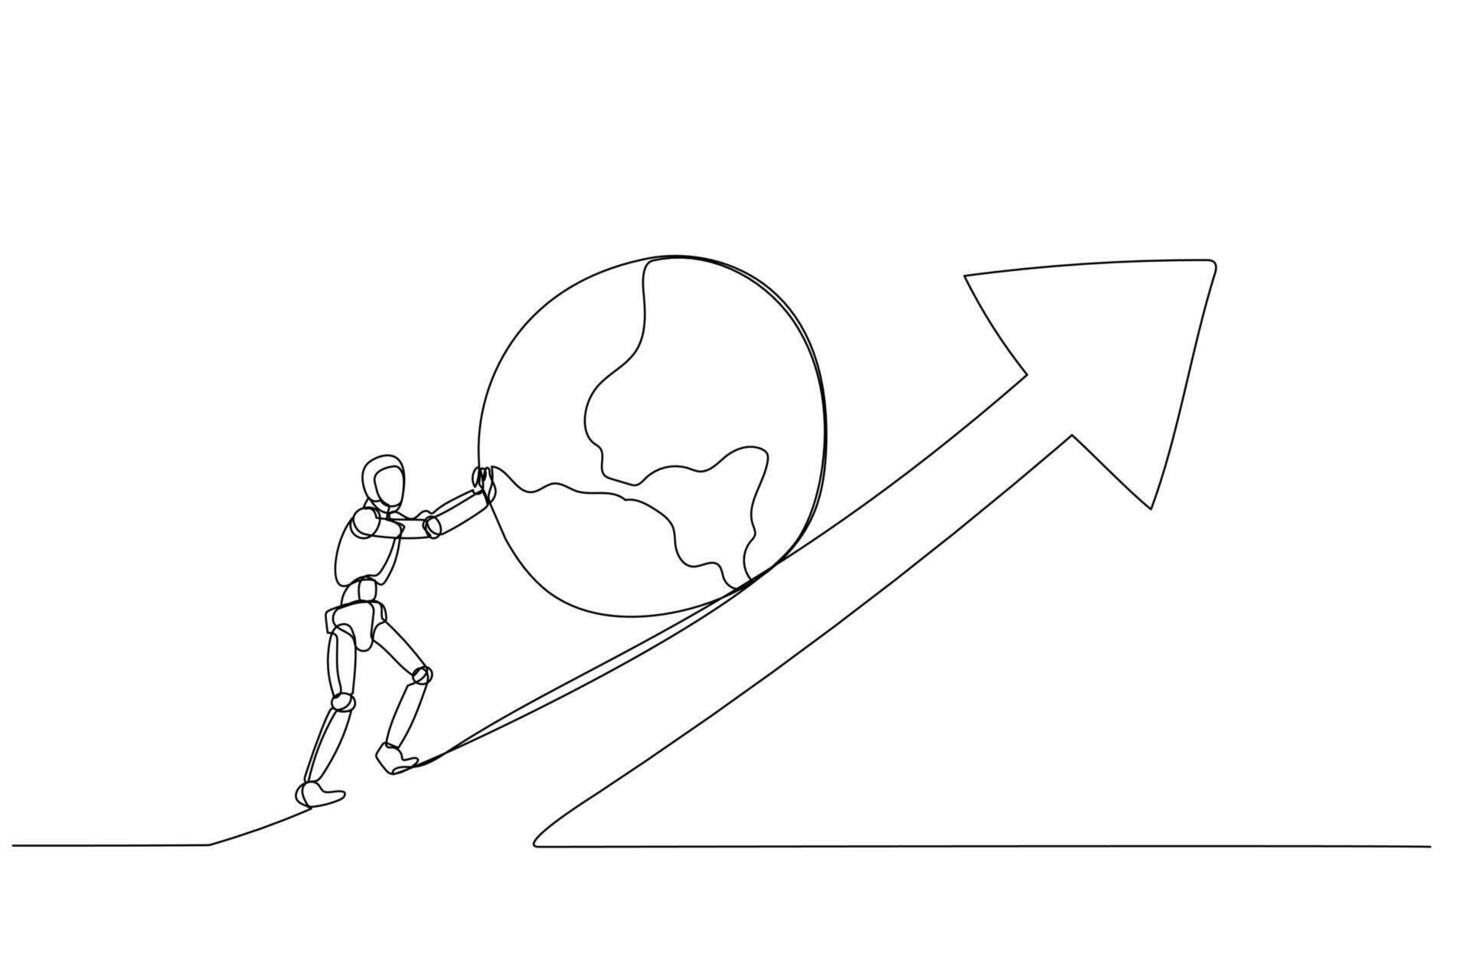 Robot pushes a globe uphill against an arrow, symbolizing global challenges and collective effort for positive outcomes. vector